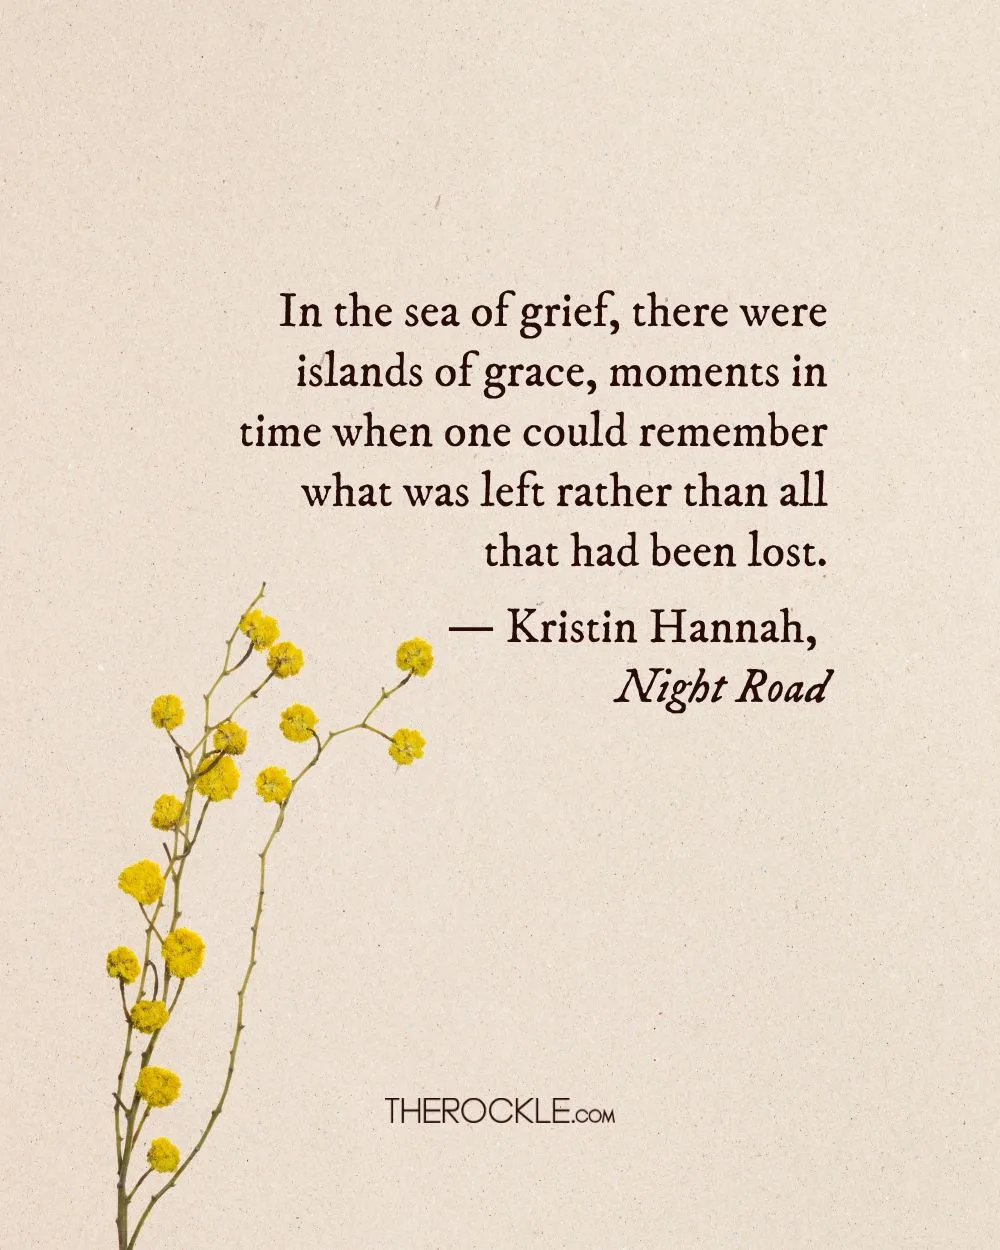 Kristin Hannah's quote about fatherhood